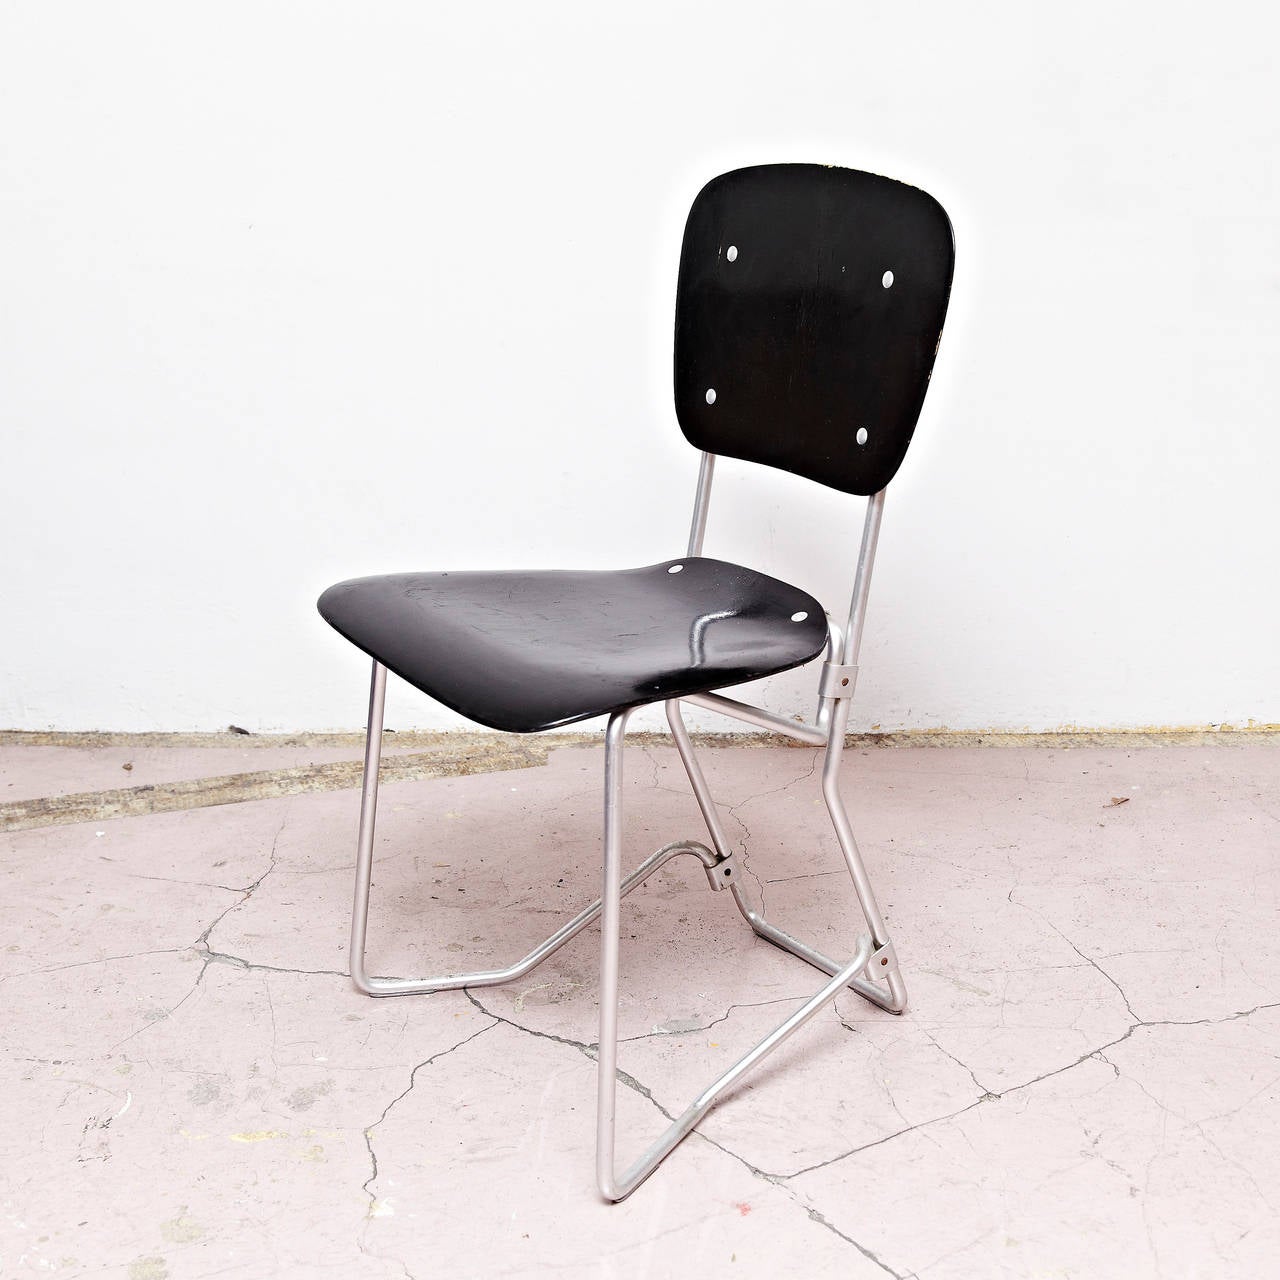 Mid-20th Century Armin Wirth Mid Century Modern Metal and Wood Swiss Stackable Chairs for Aluflex